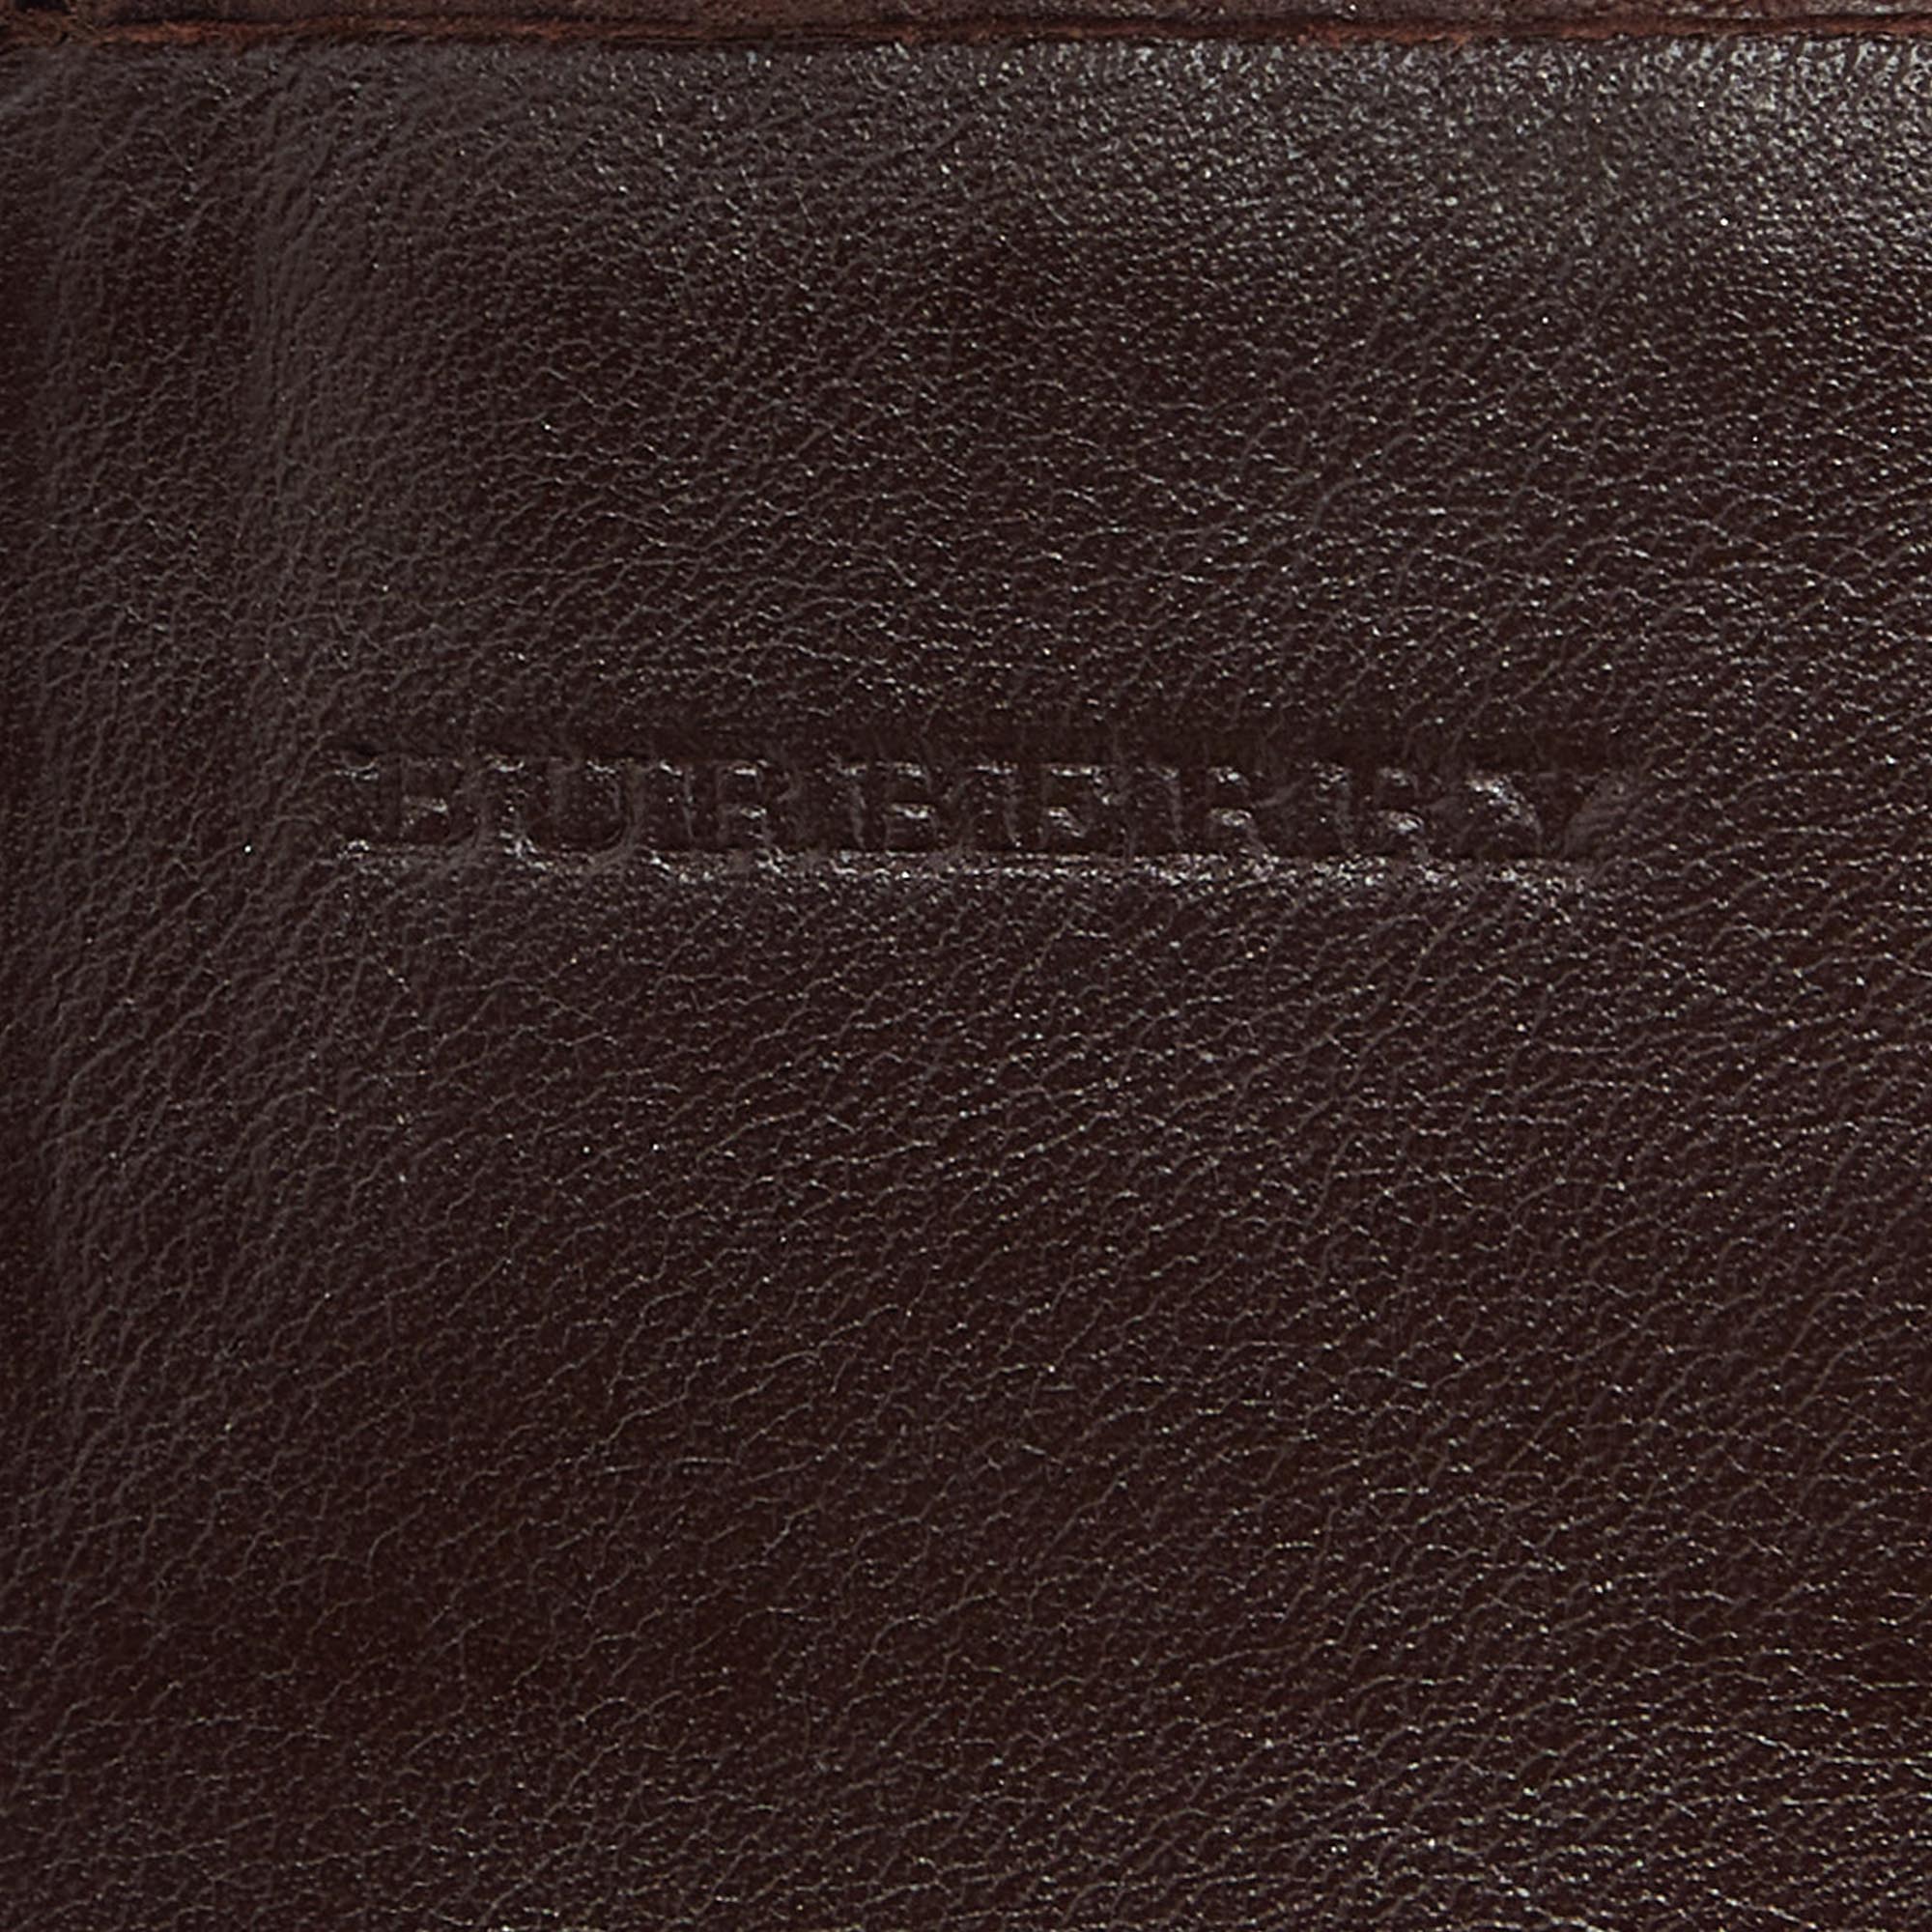 Burberry Dark Brown Leather Continental Wallet